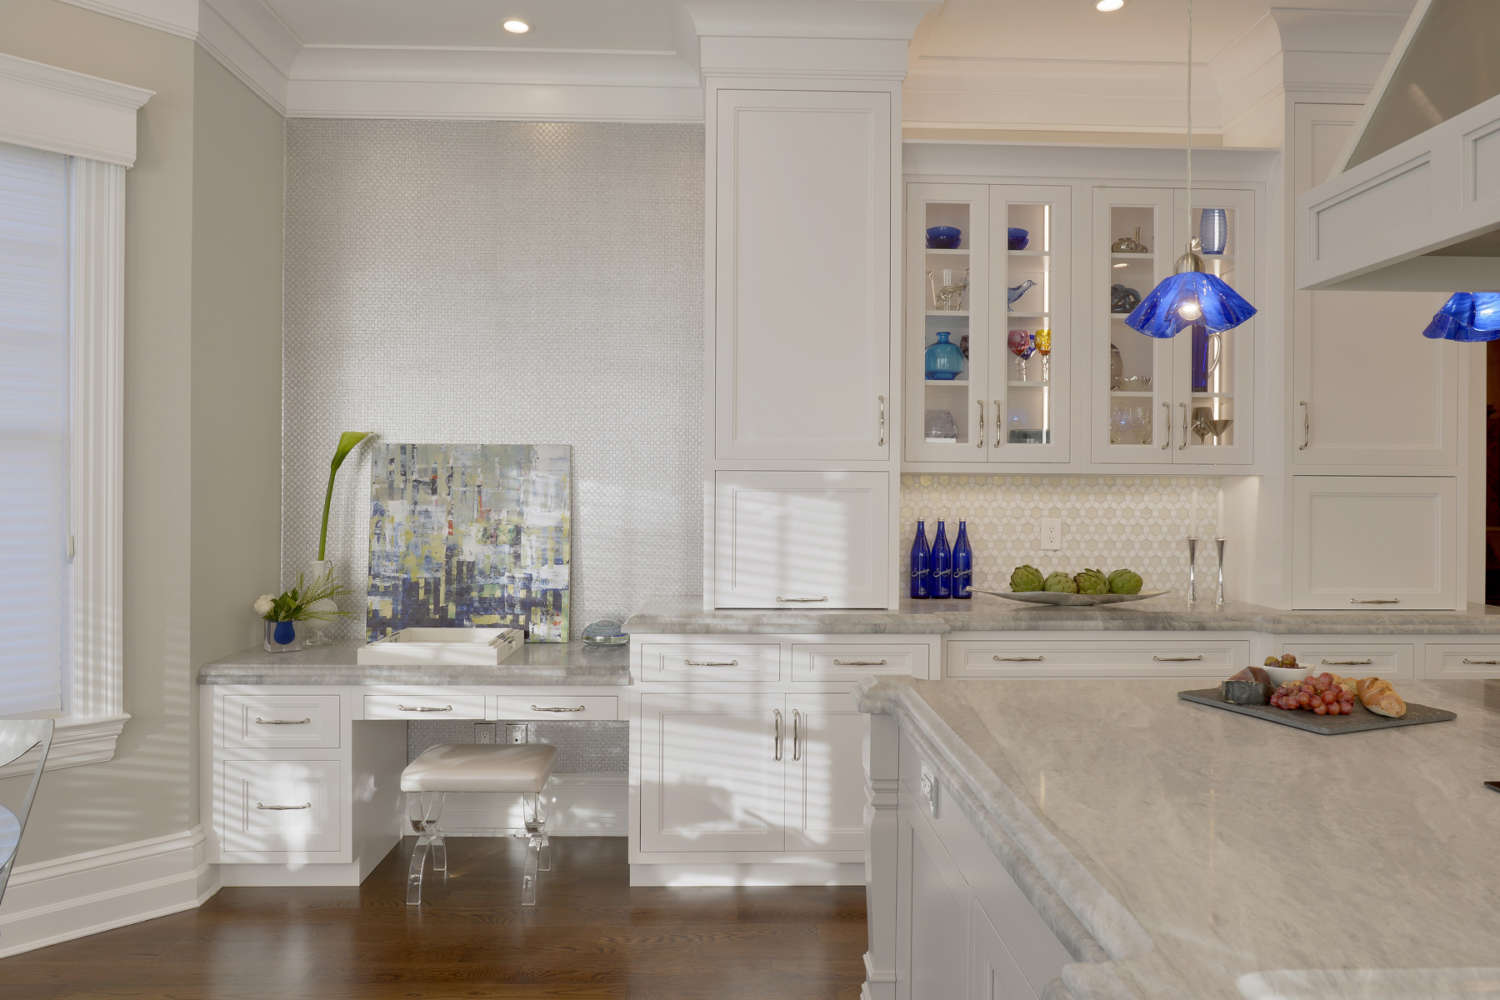 Bright U-shaped kitchen with white painted fully custom Bilotta cabinets, light marble countertops, and desk in kitchen. Cabinet fronts are a mix of full panel and glass front doors.